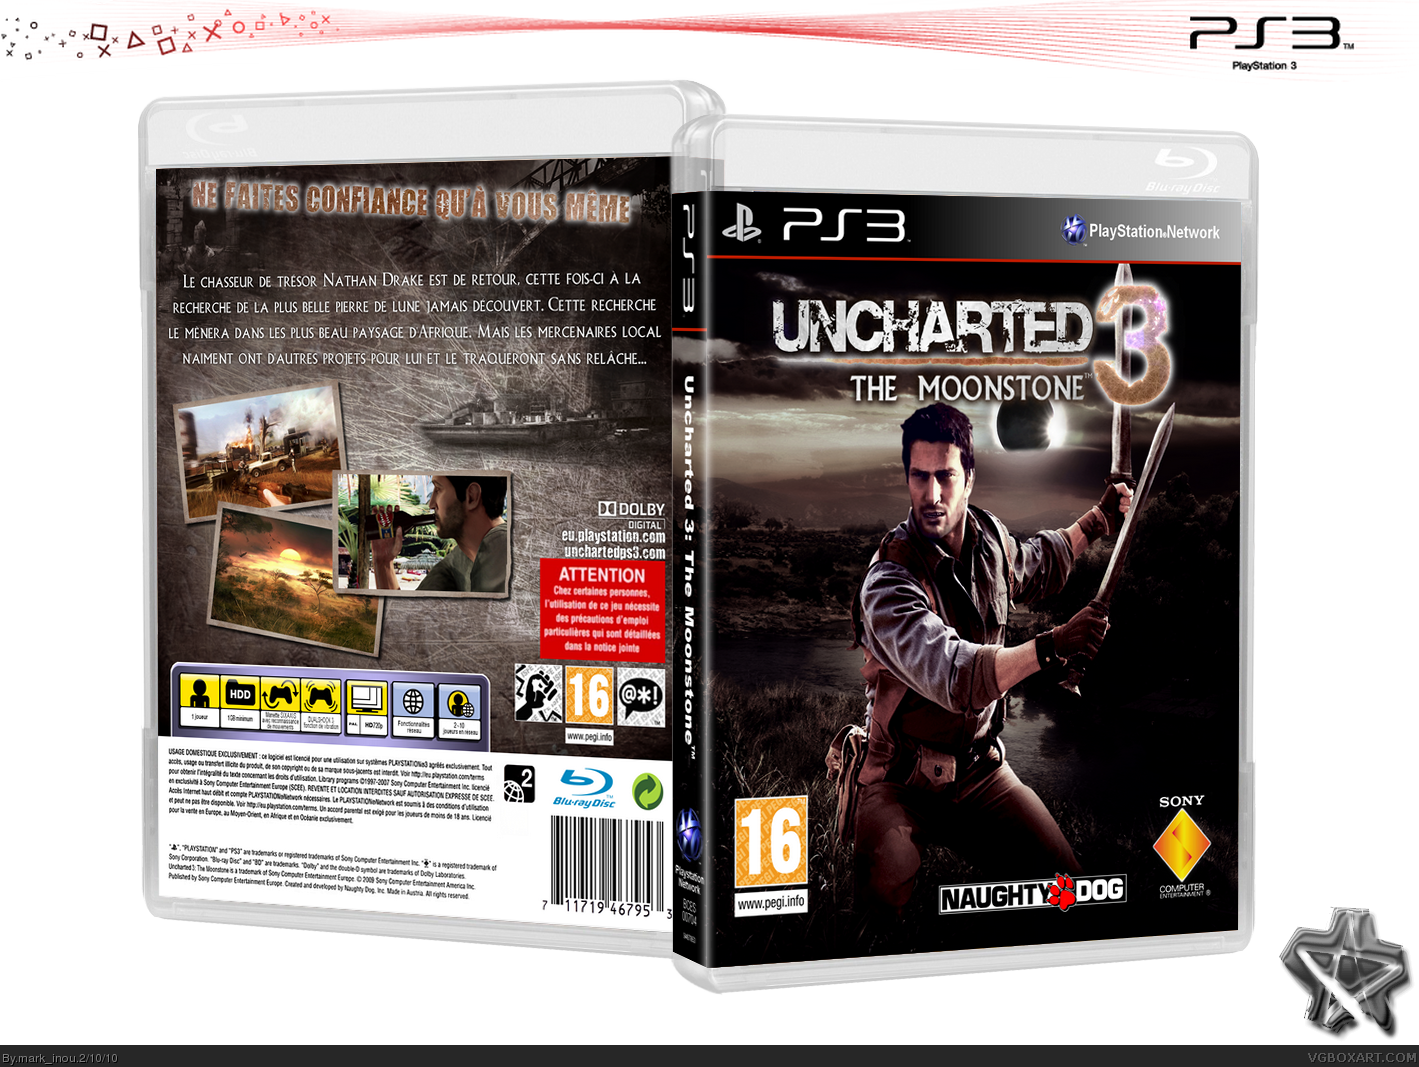 Uncharted 3: The Moonstone box cover